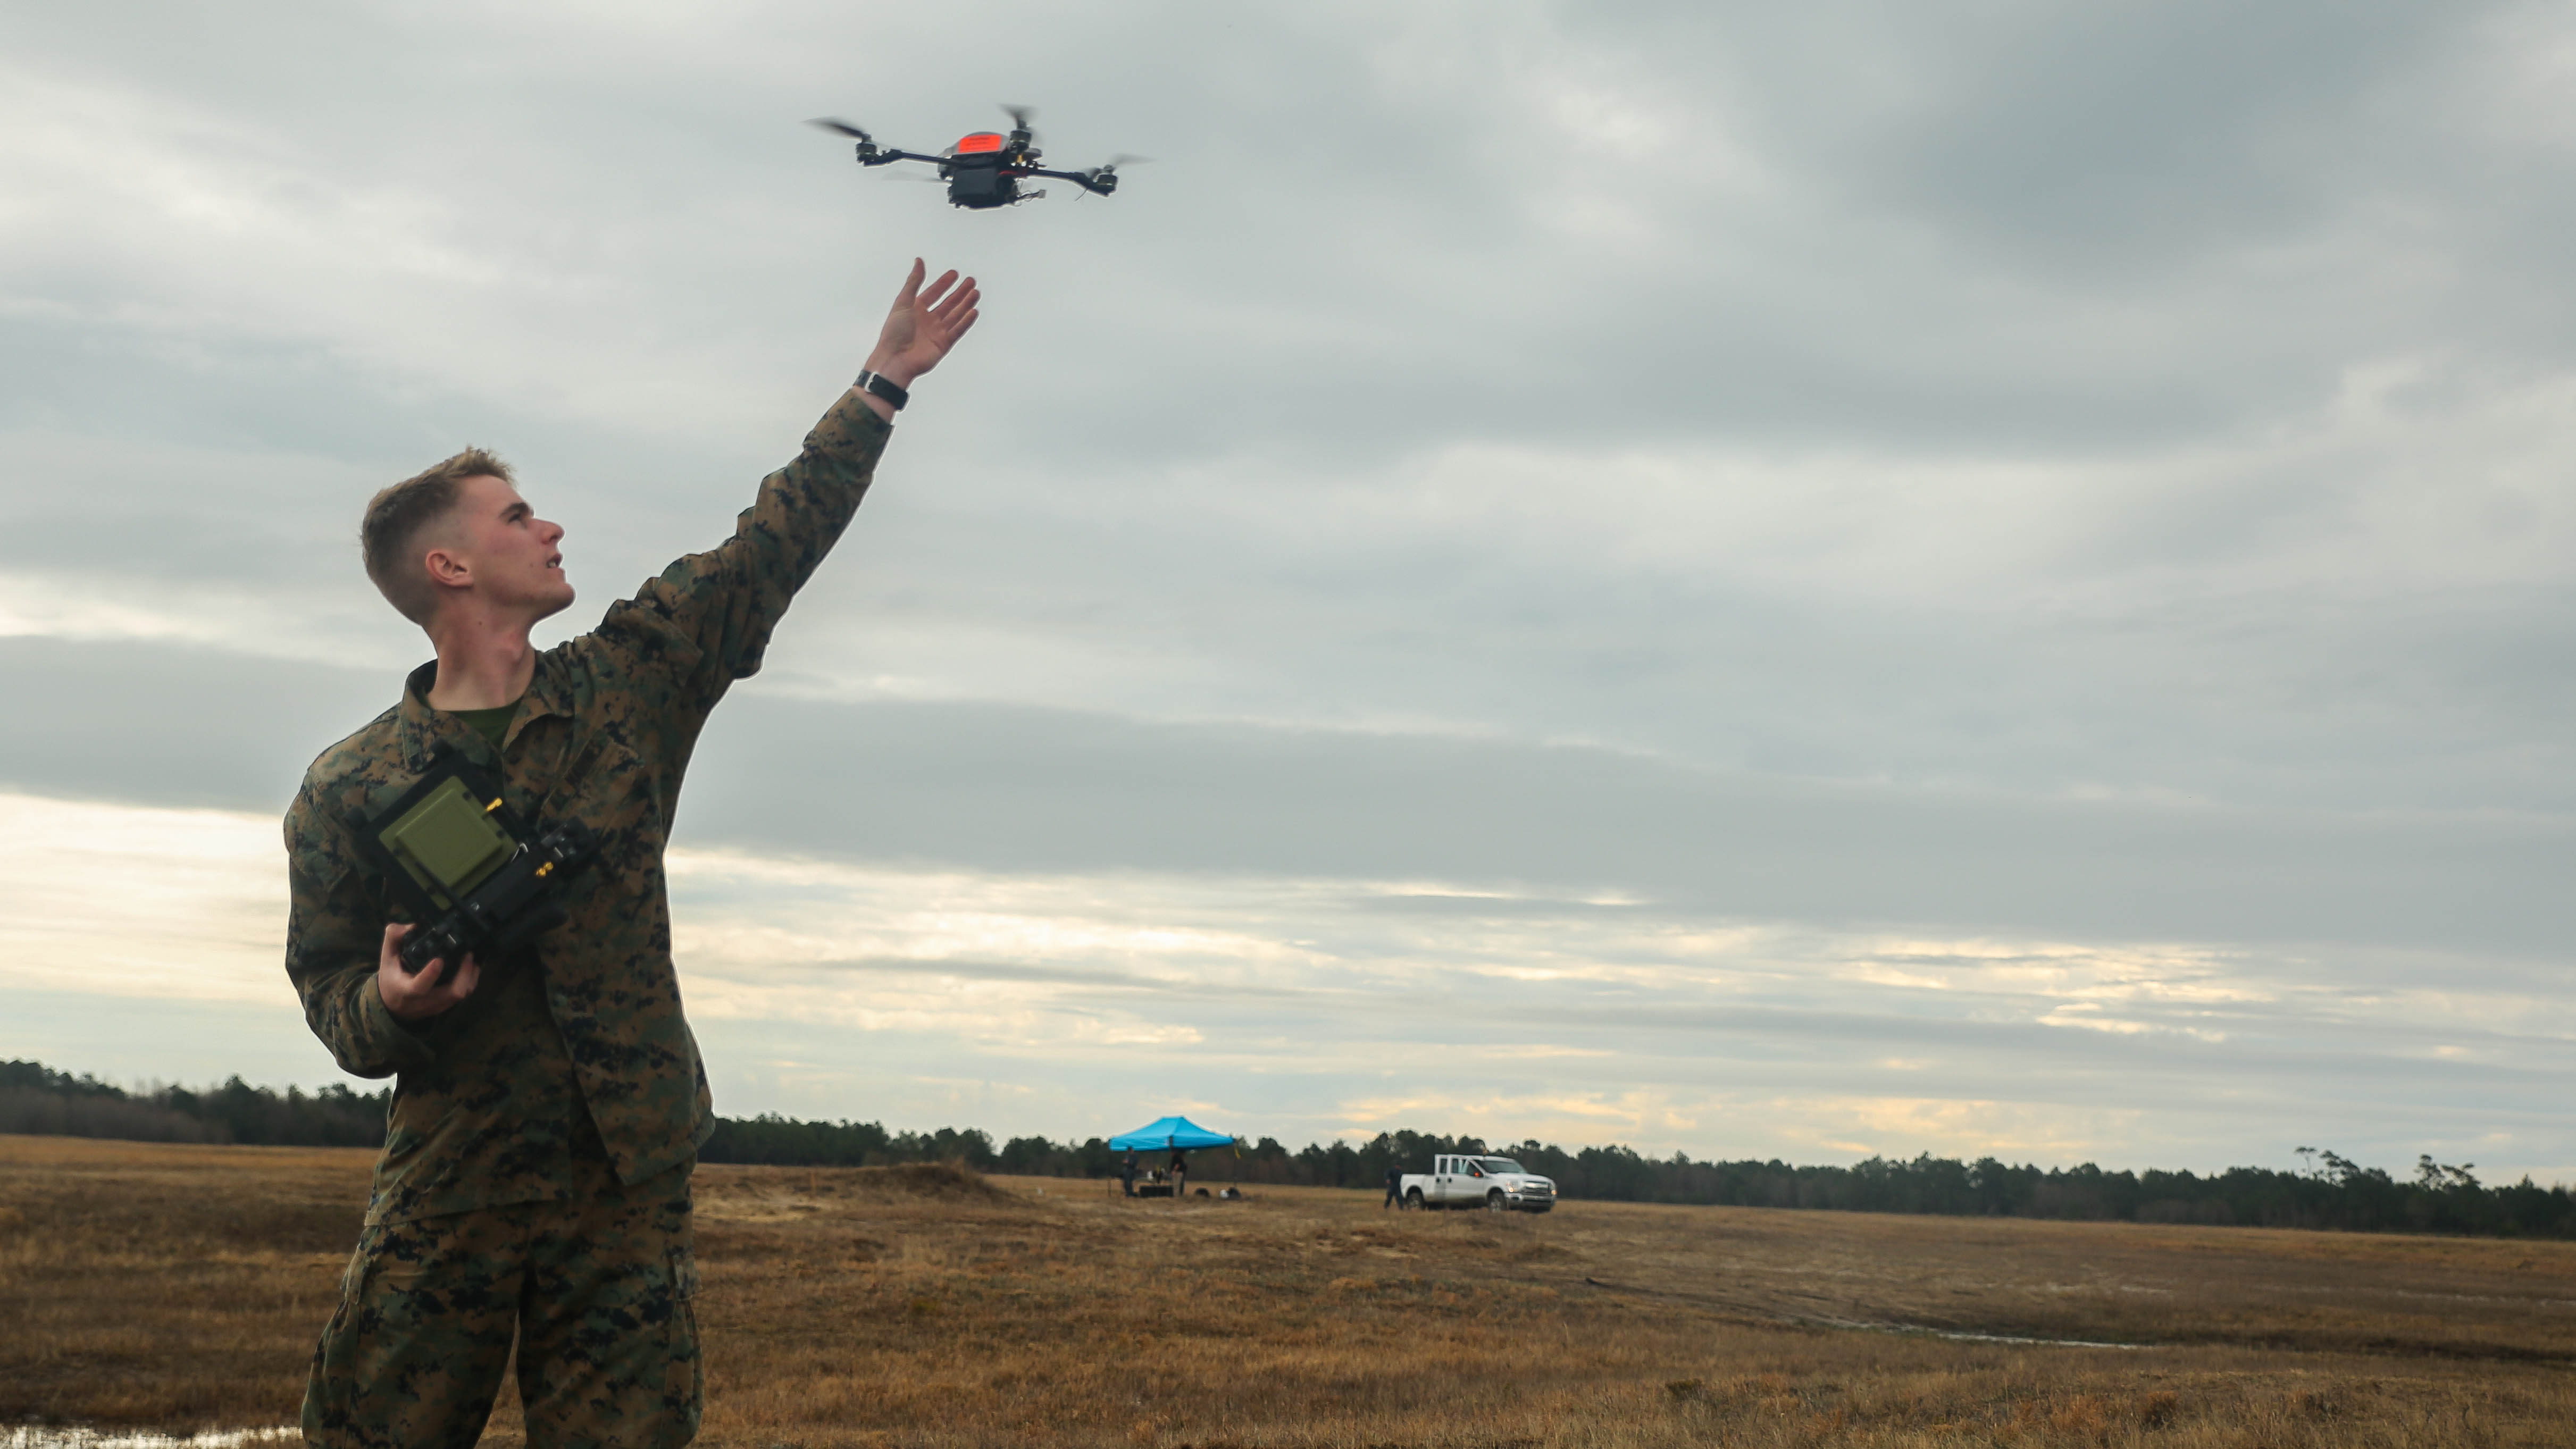 Mini drones: growing interest a US military capability